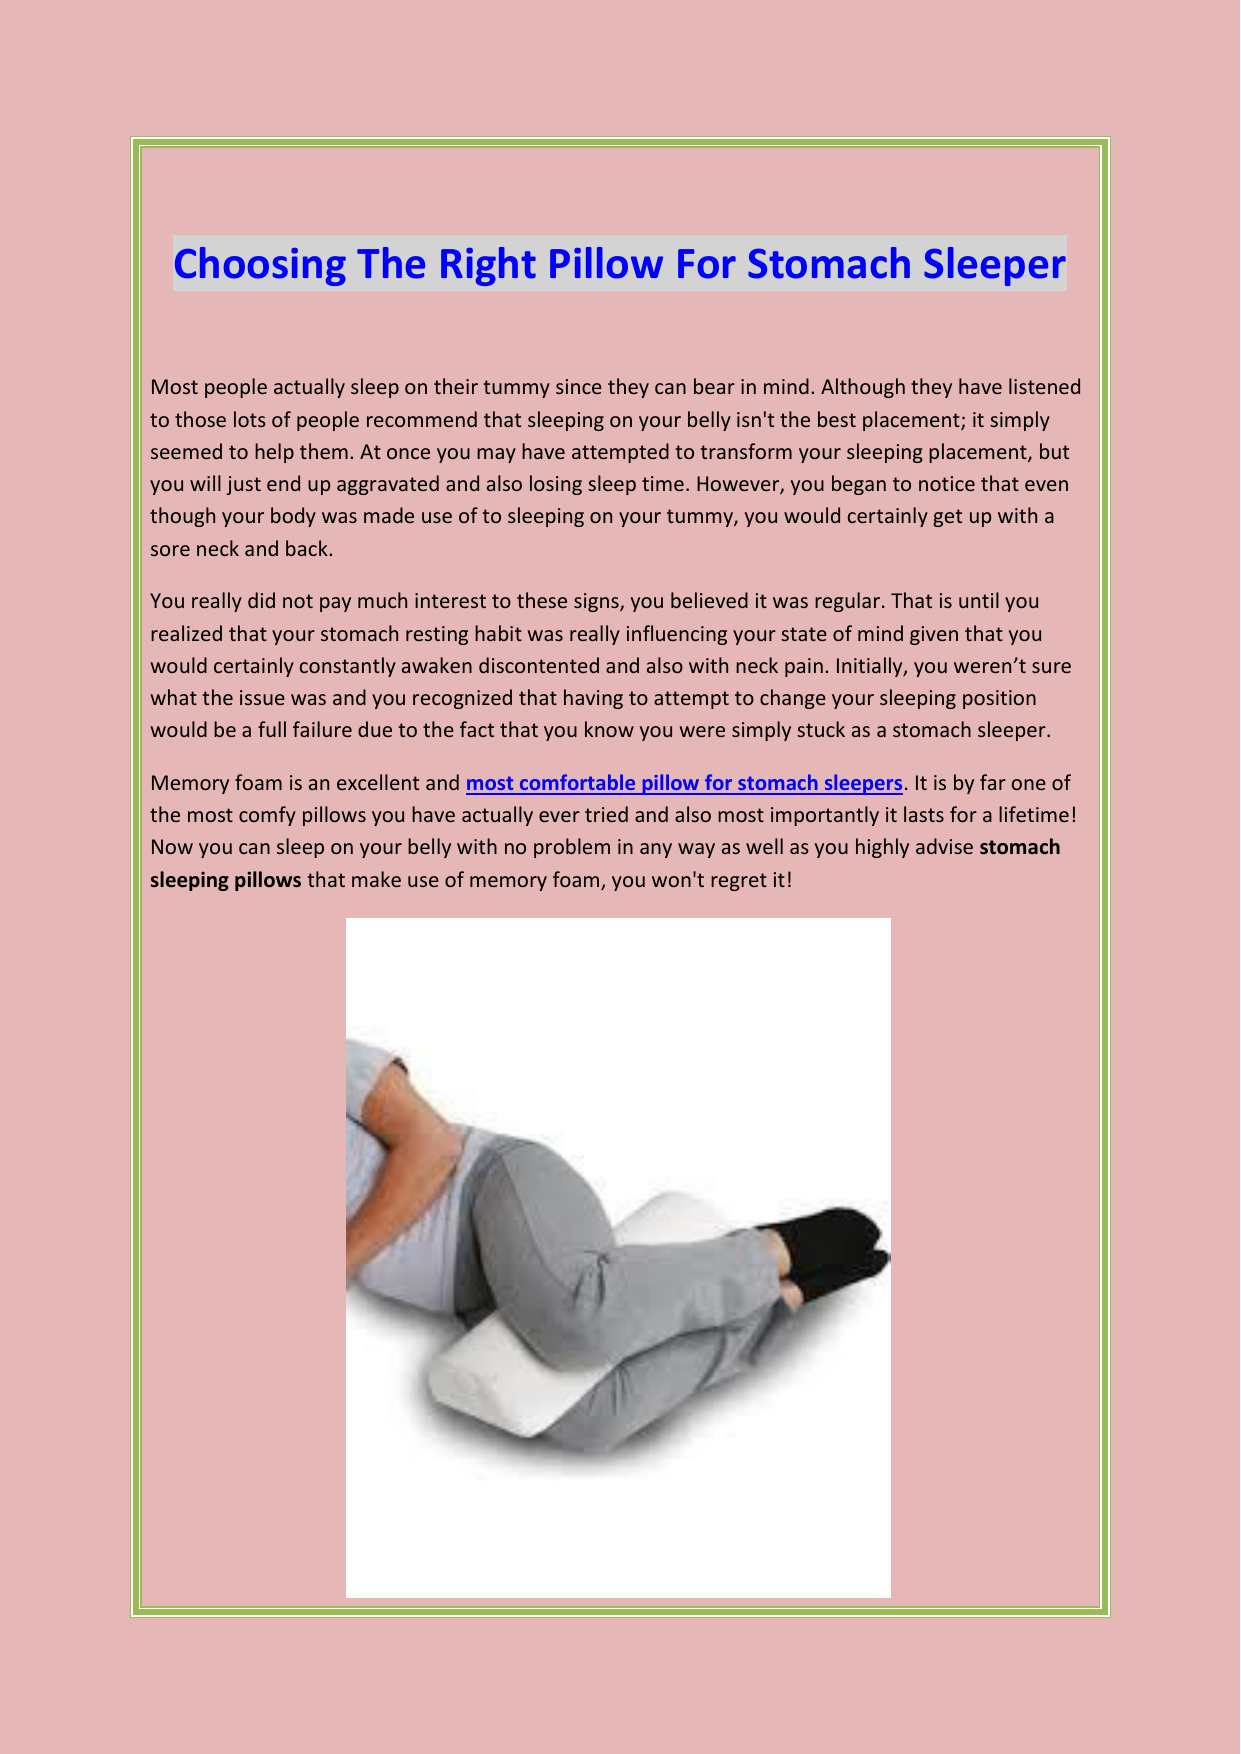 Choosing The Right Pillow For Stomach Sleeper